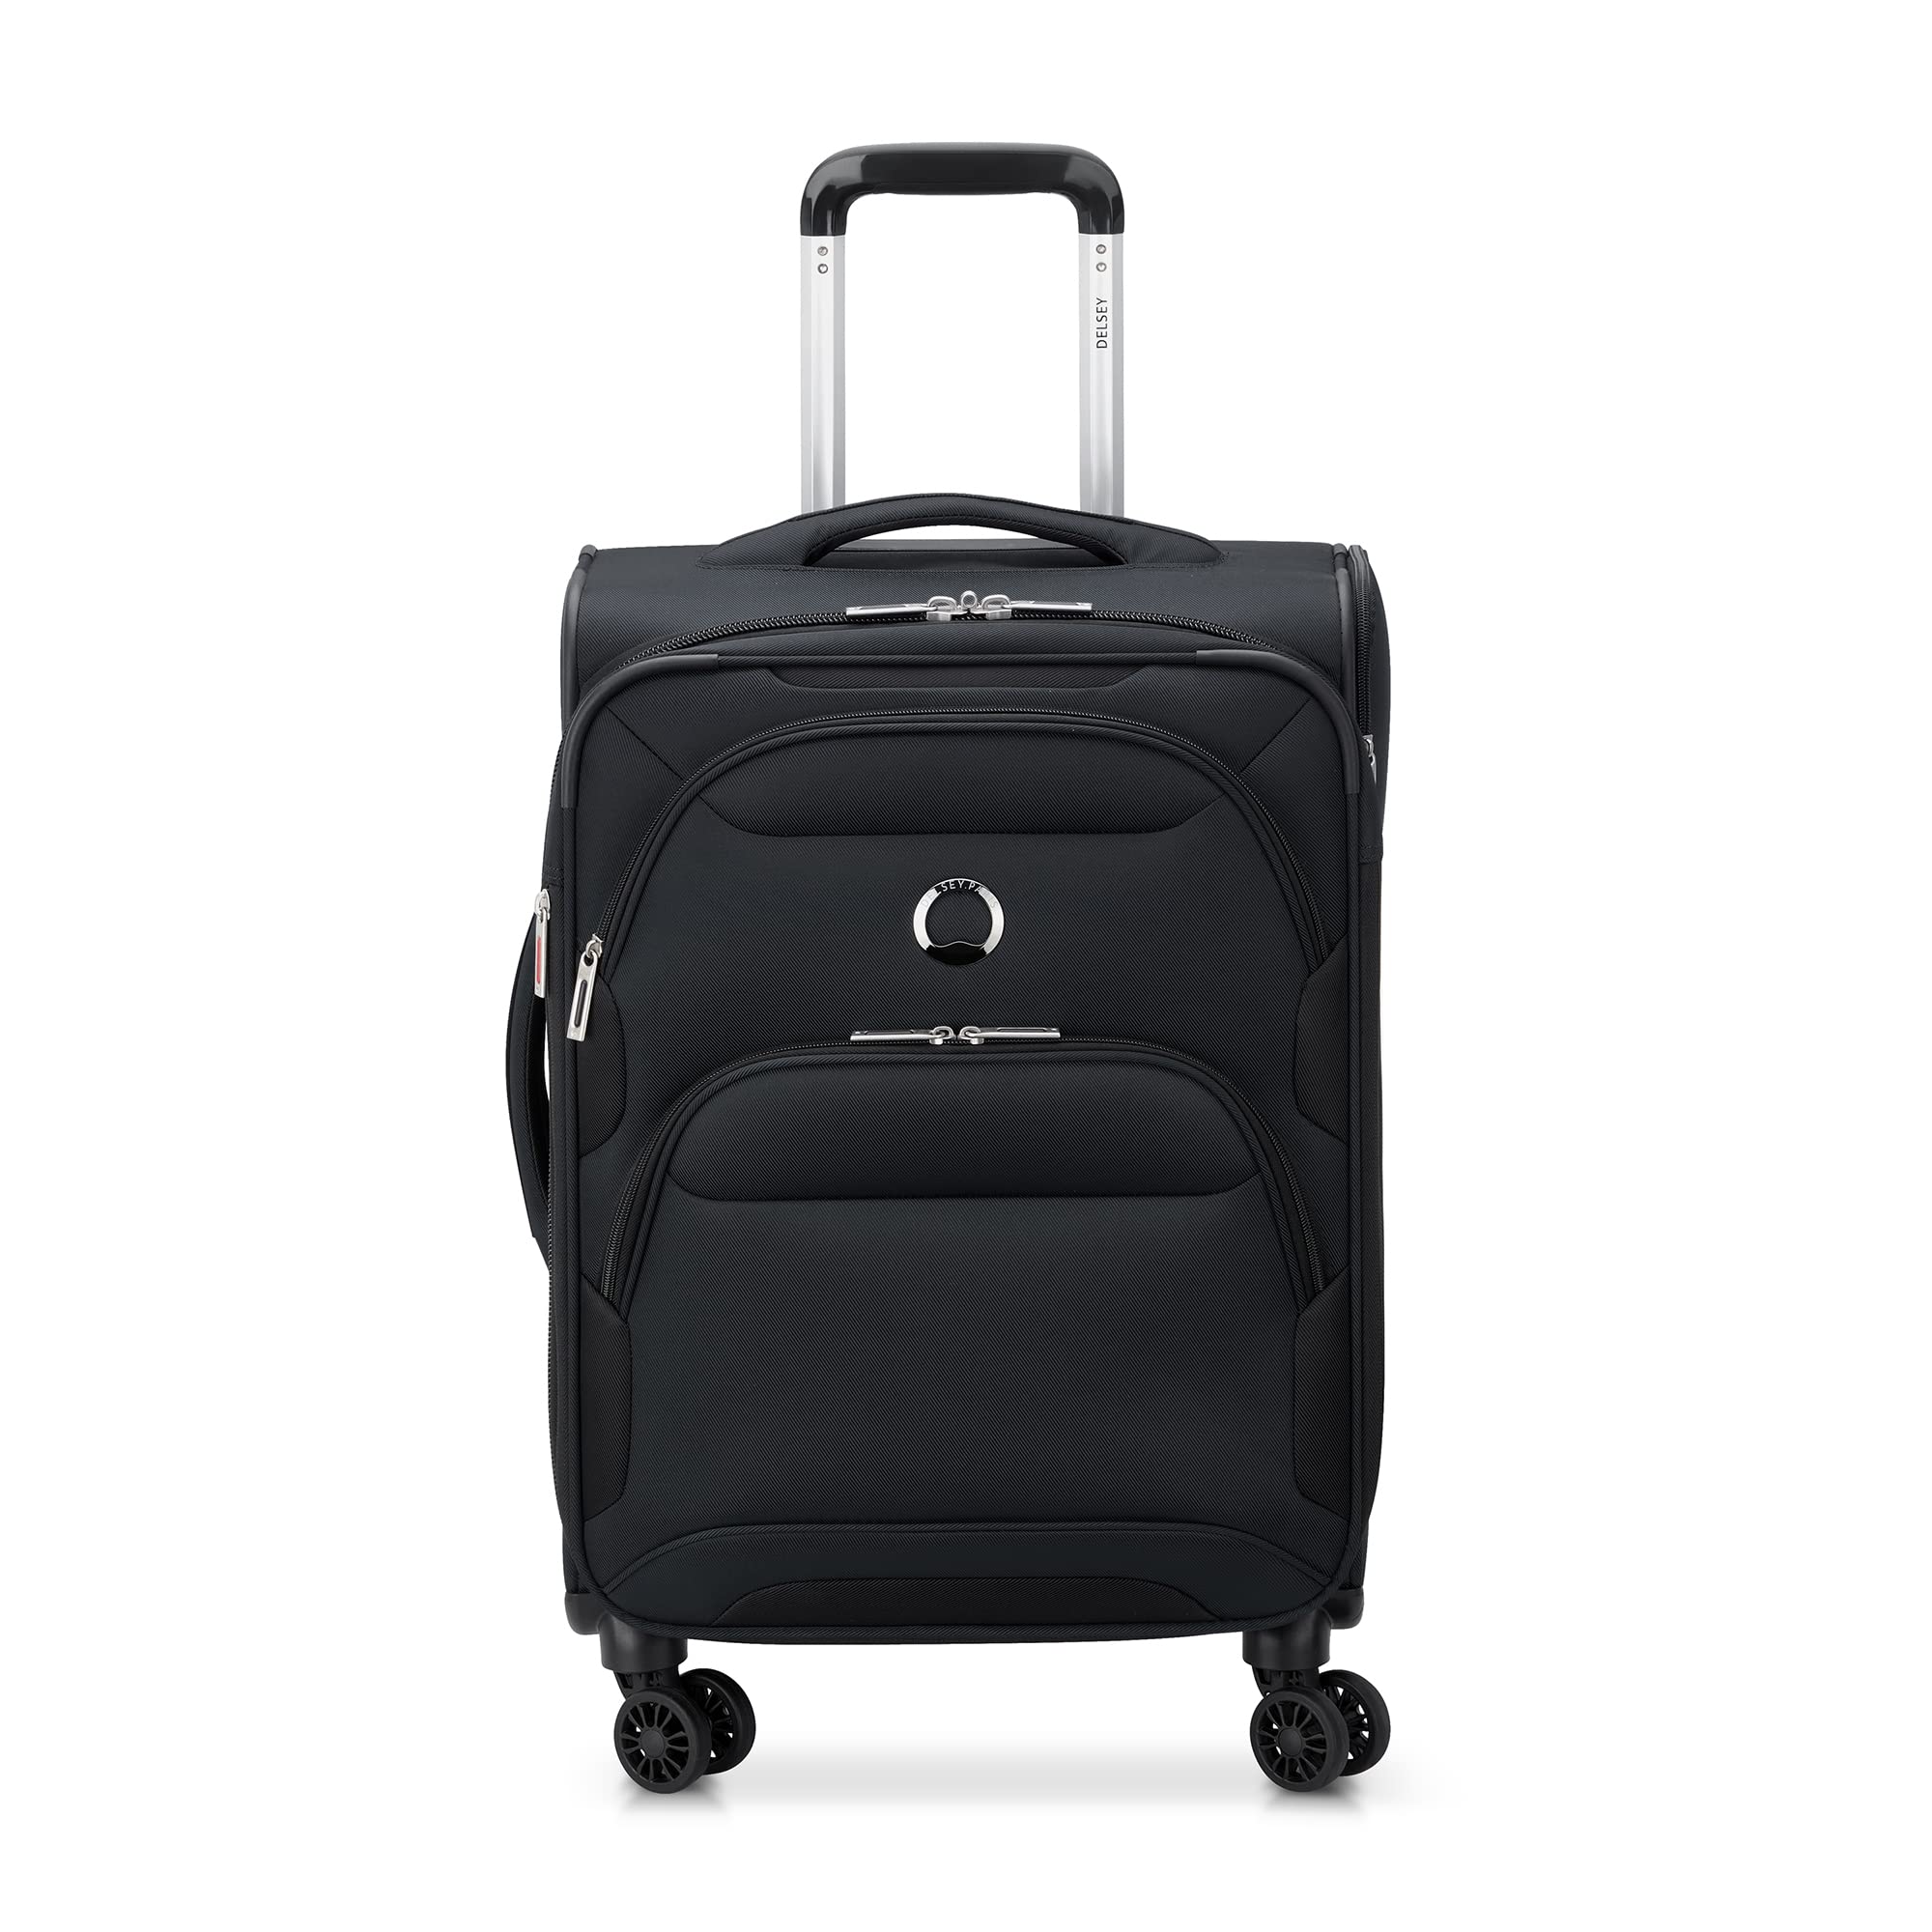 Is Delsey Luggage Good? Discover the Truth About the Quality